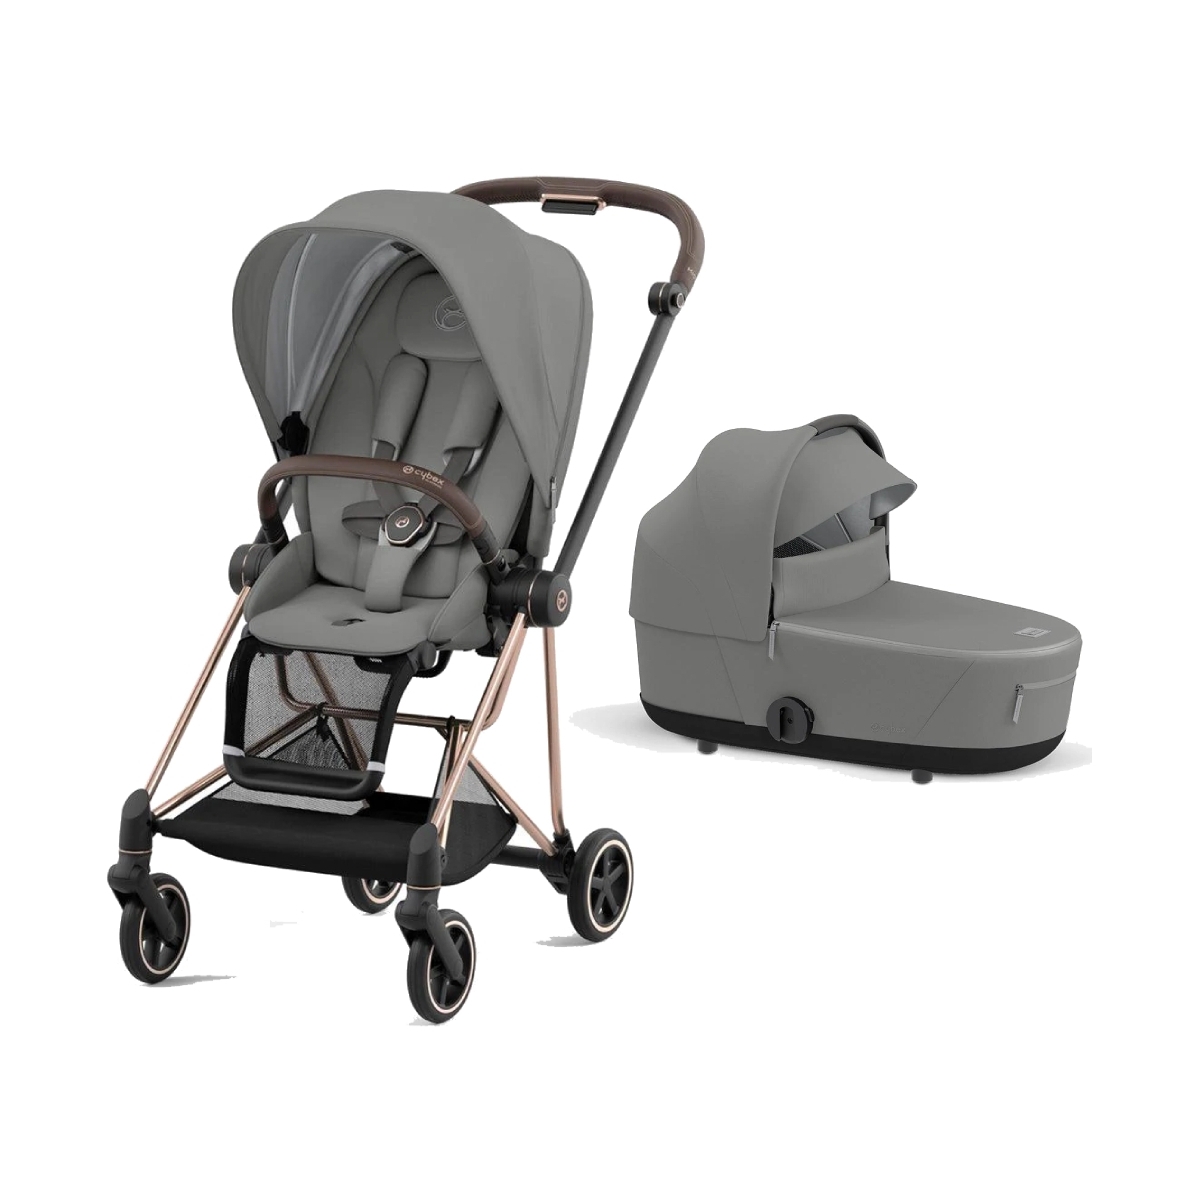 Cybex Mios Rose Gold Pushchair with Lux Carry Cot